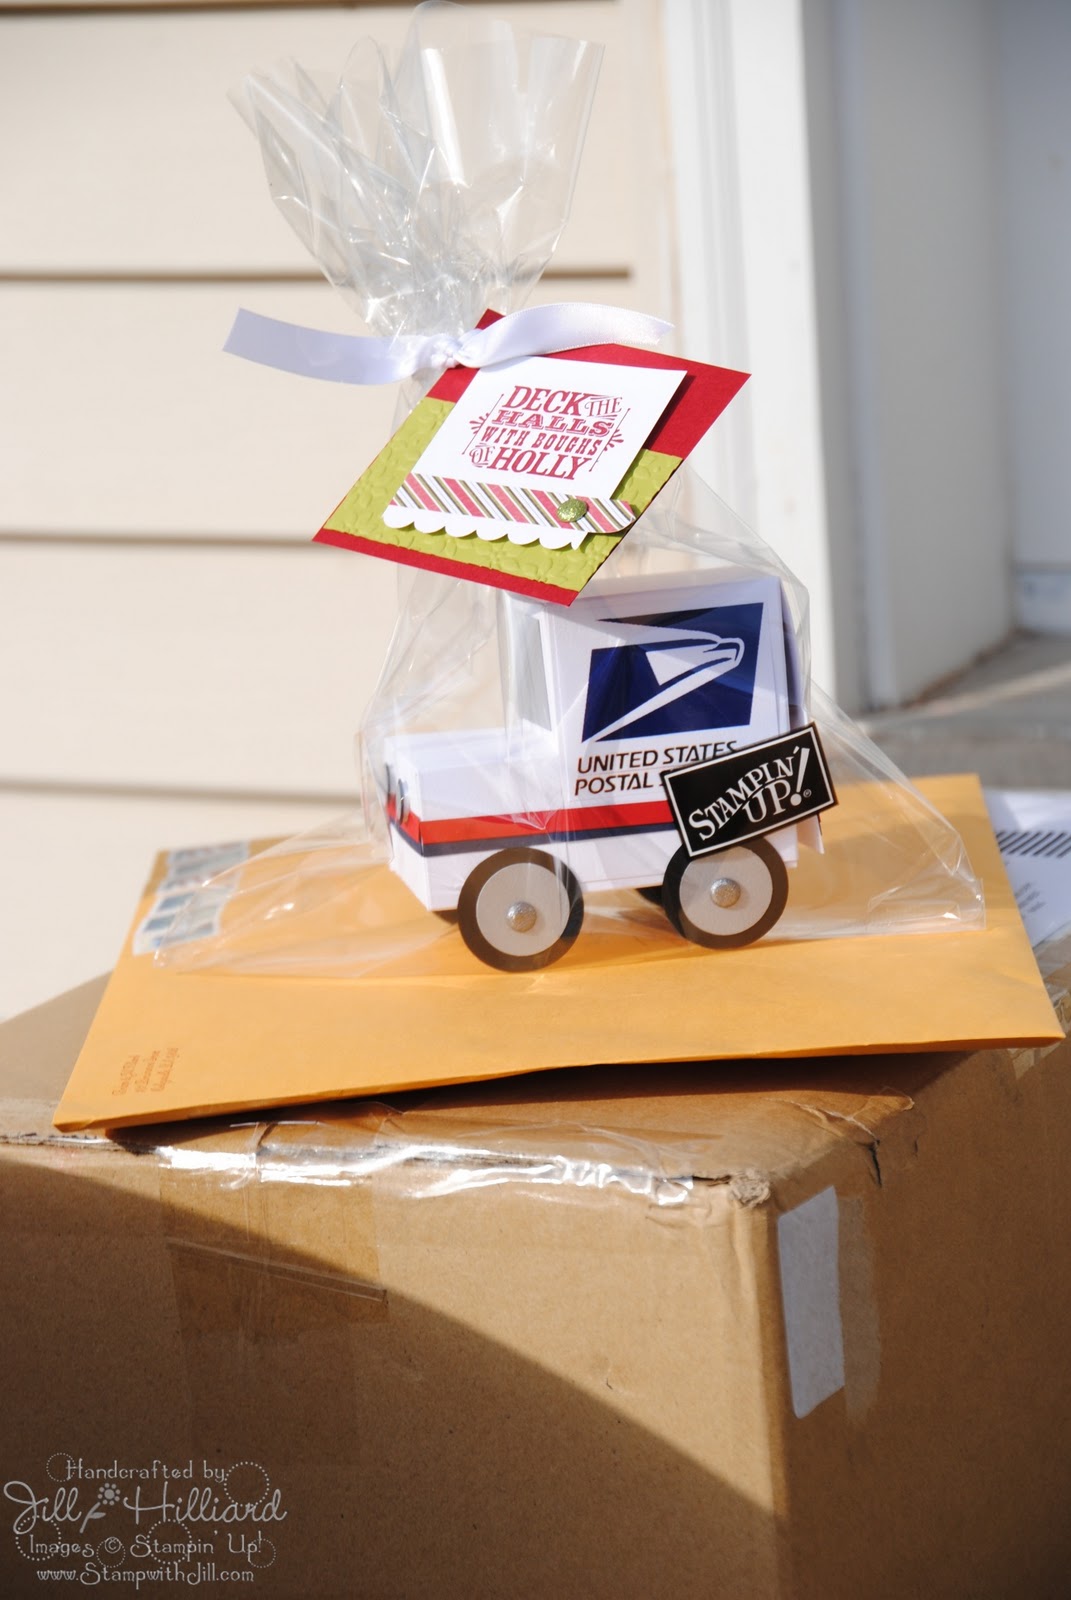 Getting My Gift on Day 1- the mailman – Jill's Card Creations